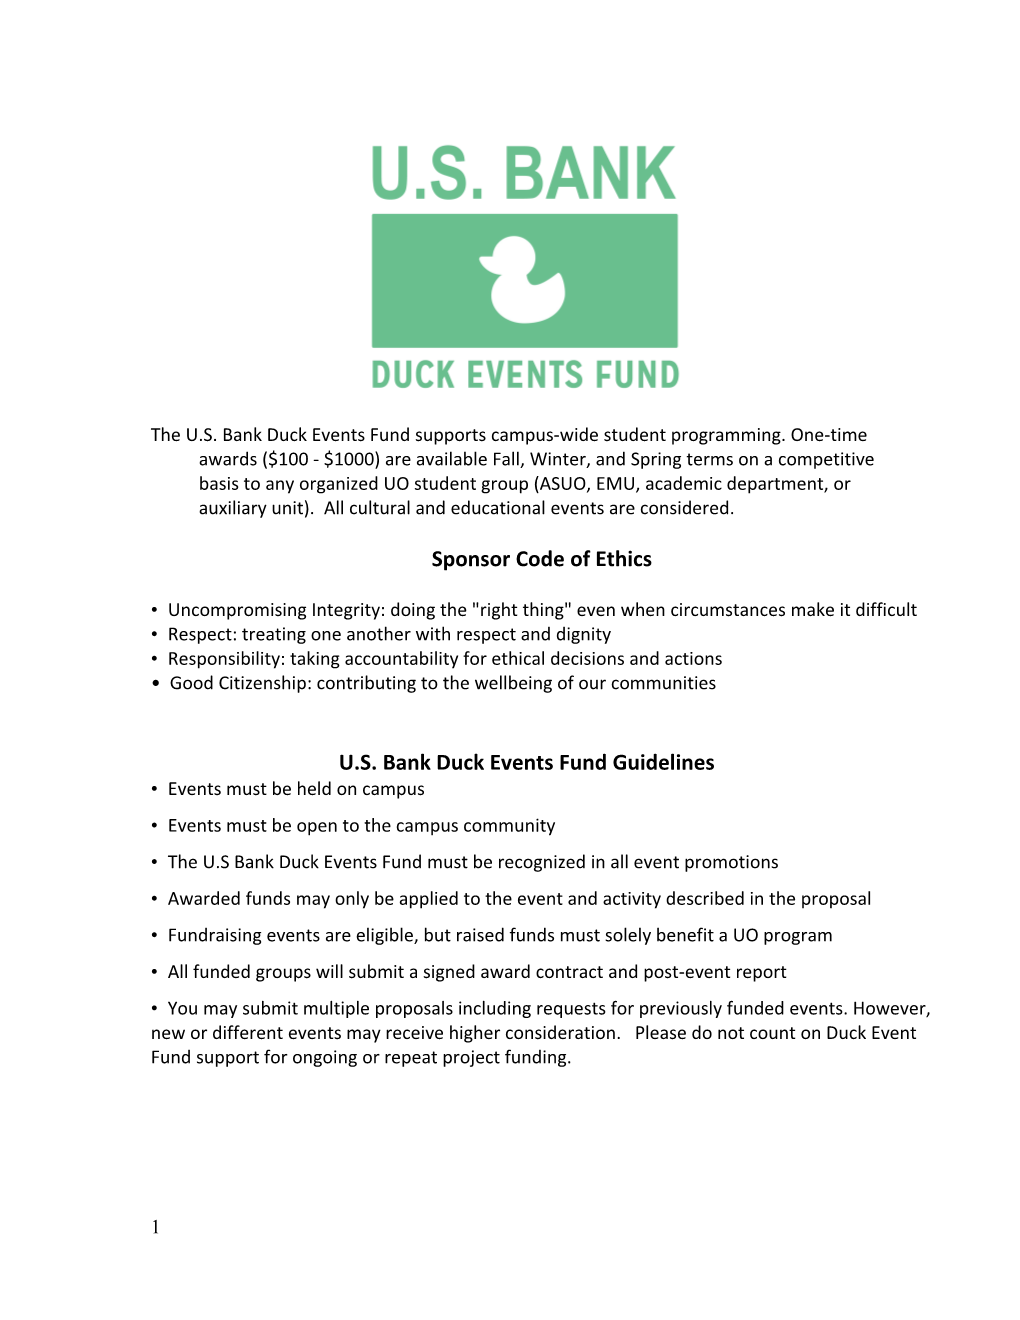 The U.S. Bank Duck Events Fund Supports Campus-Wide Student Programming. One-Time Awards